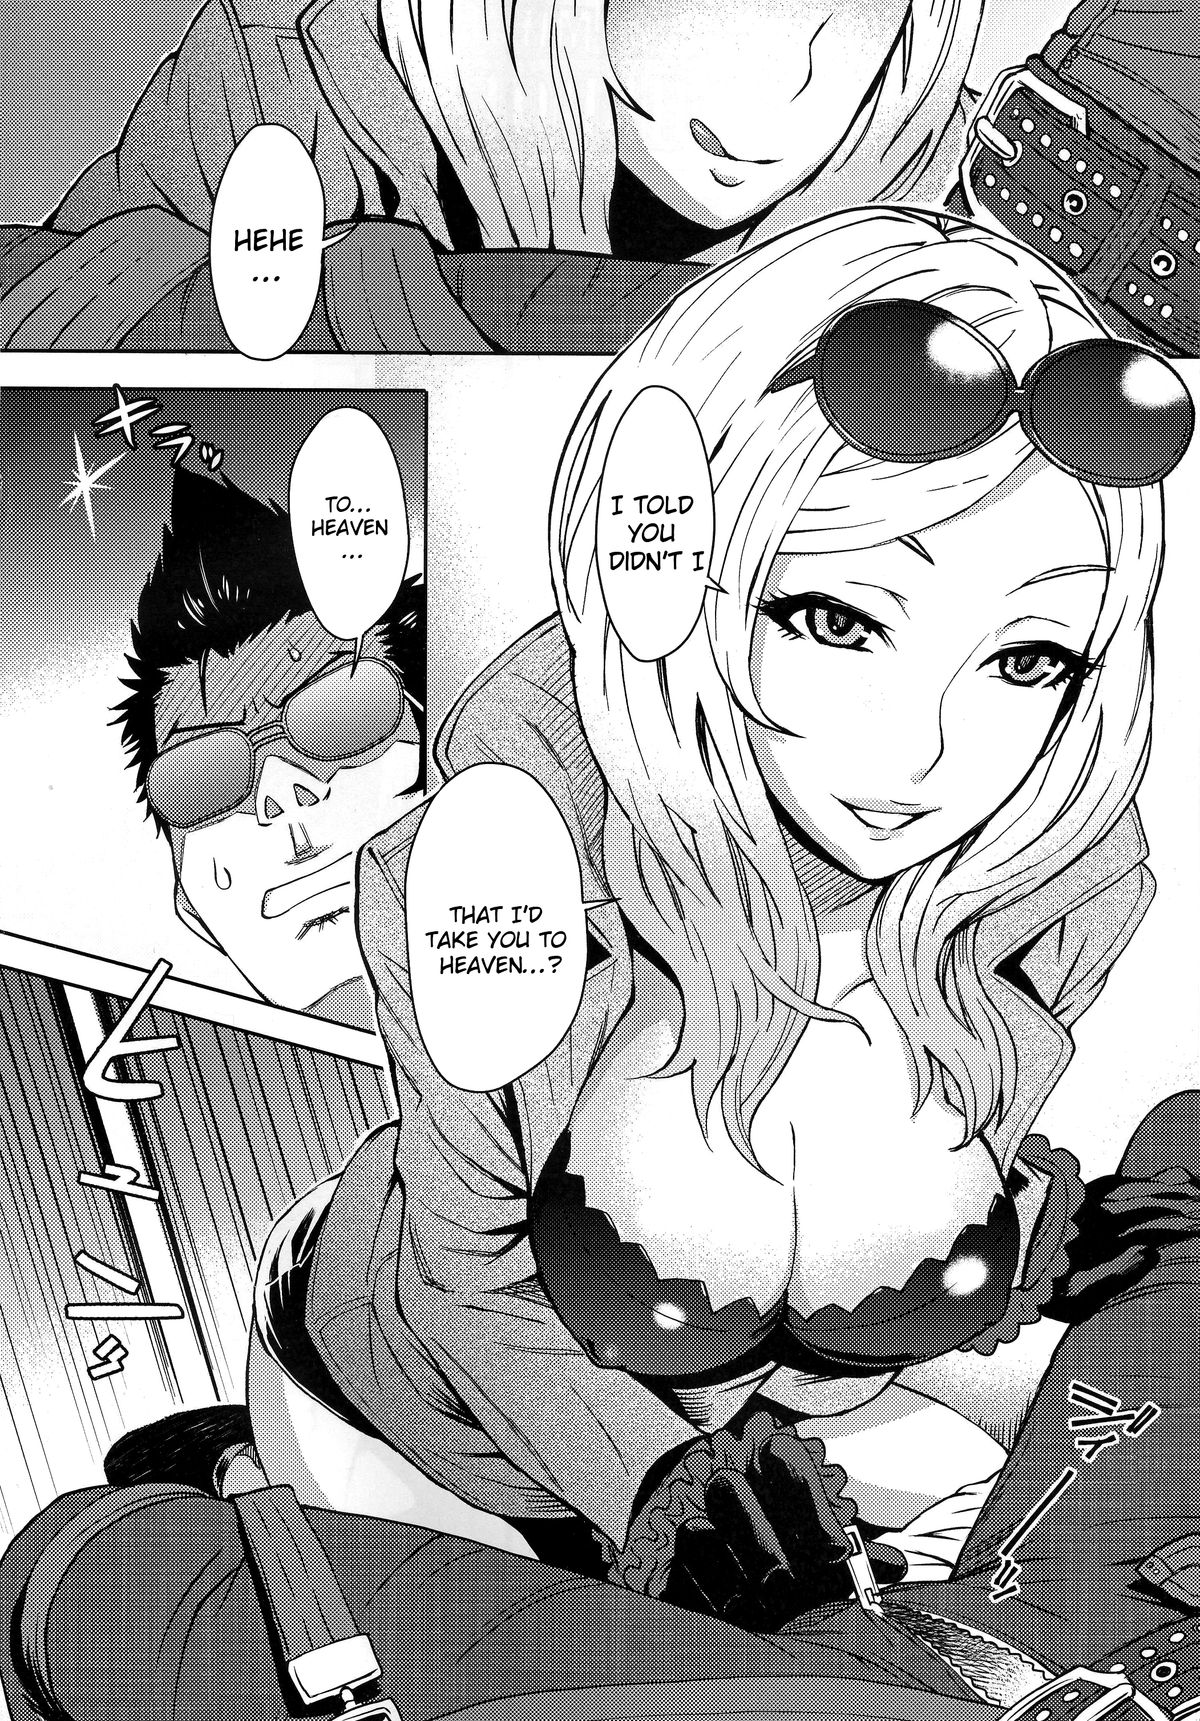 (C79) [Eight Beat (Itou Eight)] NO MORE HEROINES 2 (NO MORE HEROES) [English] {doujin-moe.us} page 4 full